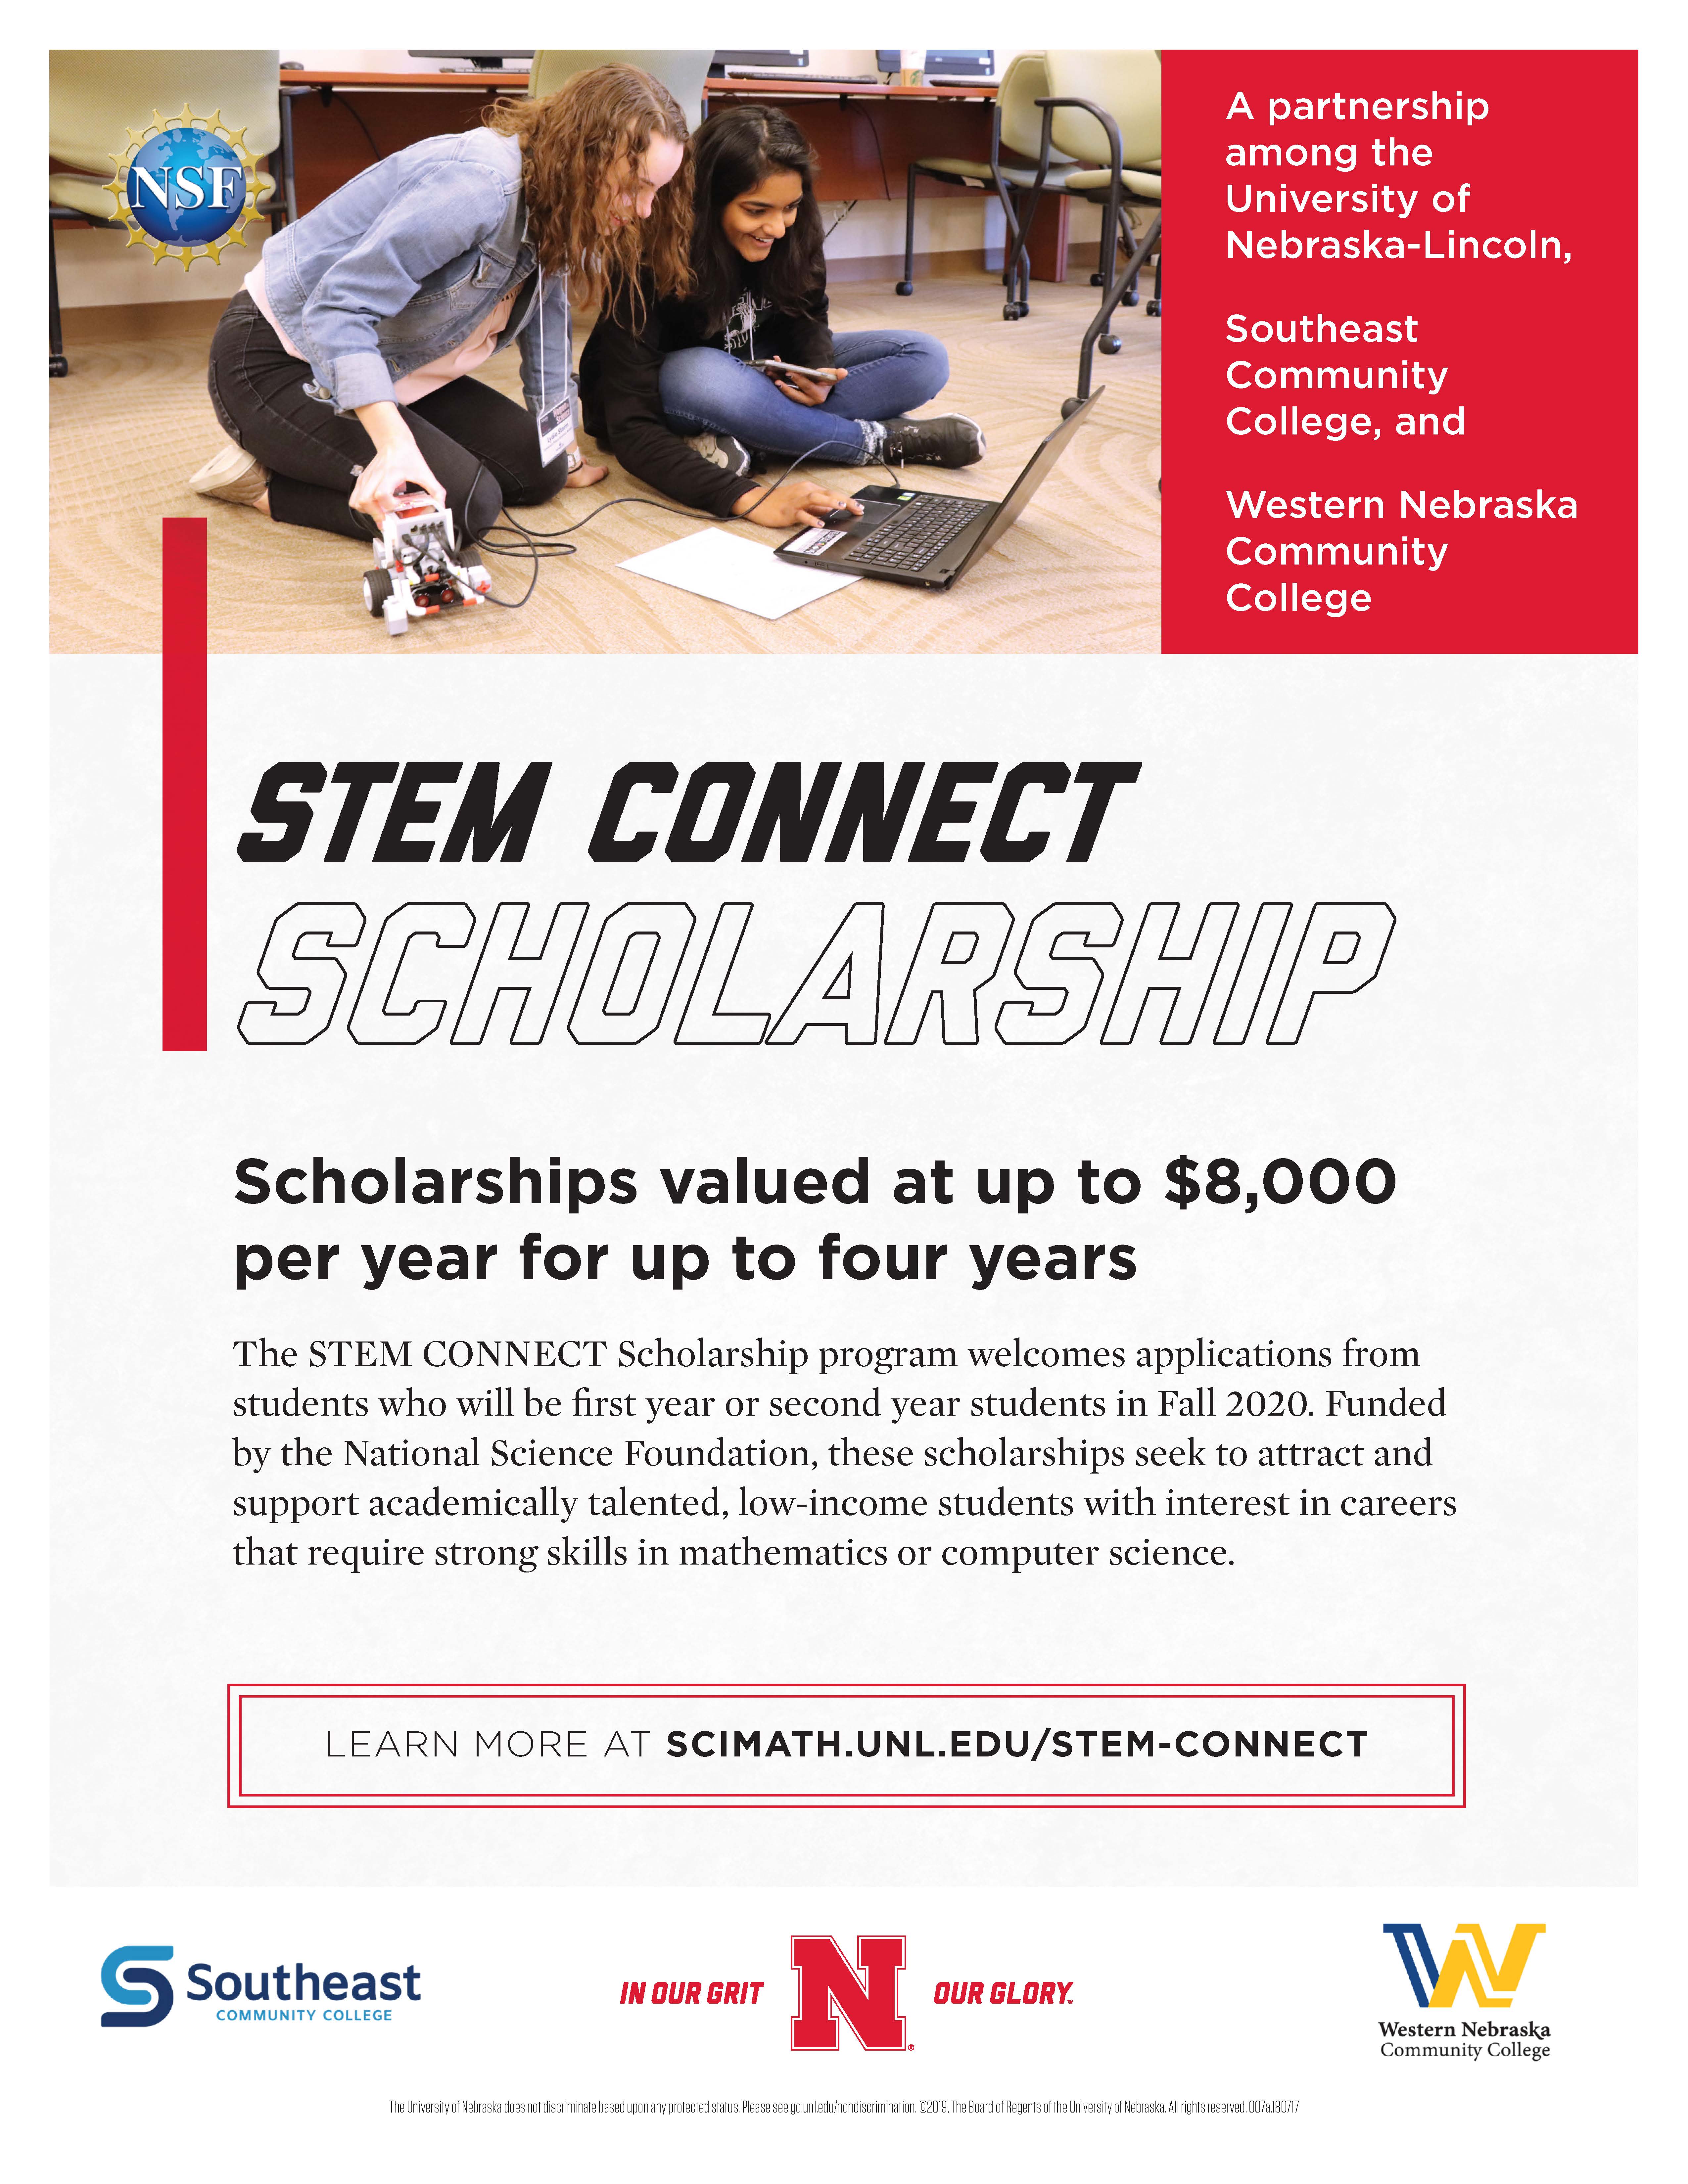 Coming soon STEM CONNECT Scholarship application for Fall 2020